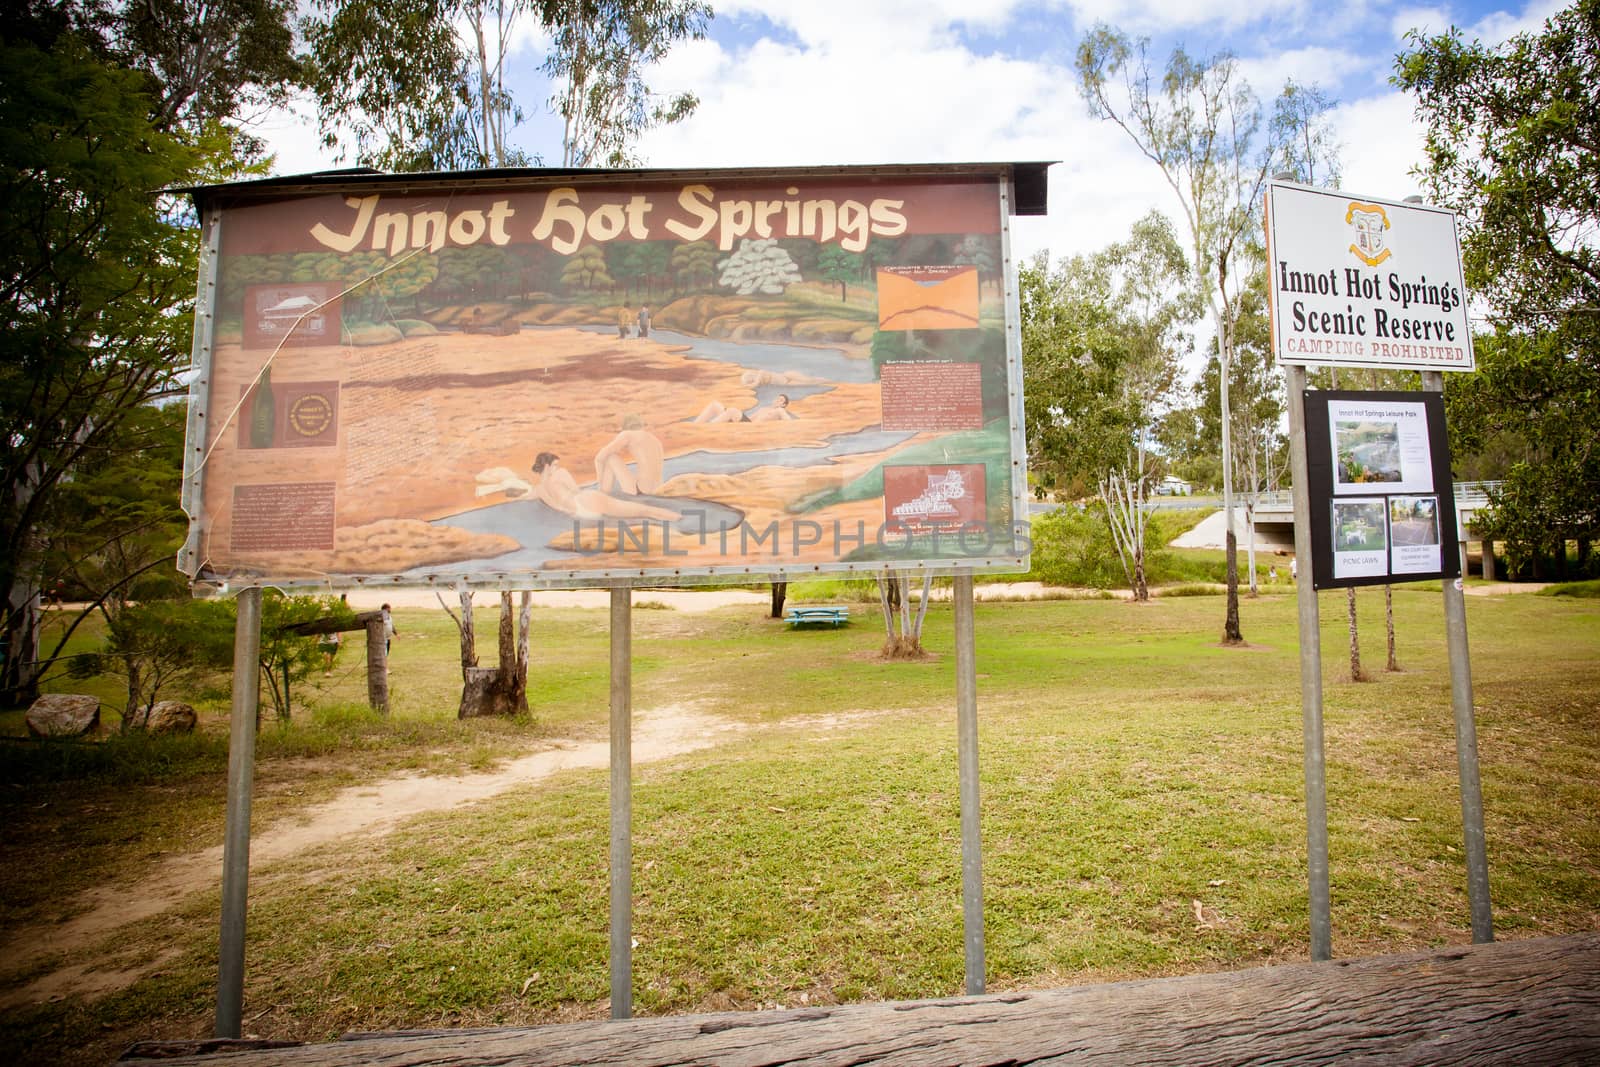 The famous Innot Hot Springs in the Atherton Tablelands area of Queensland, Australia